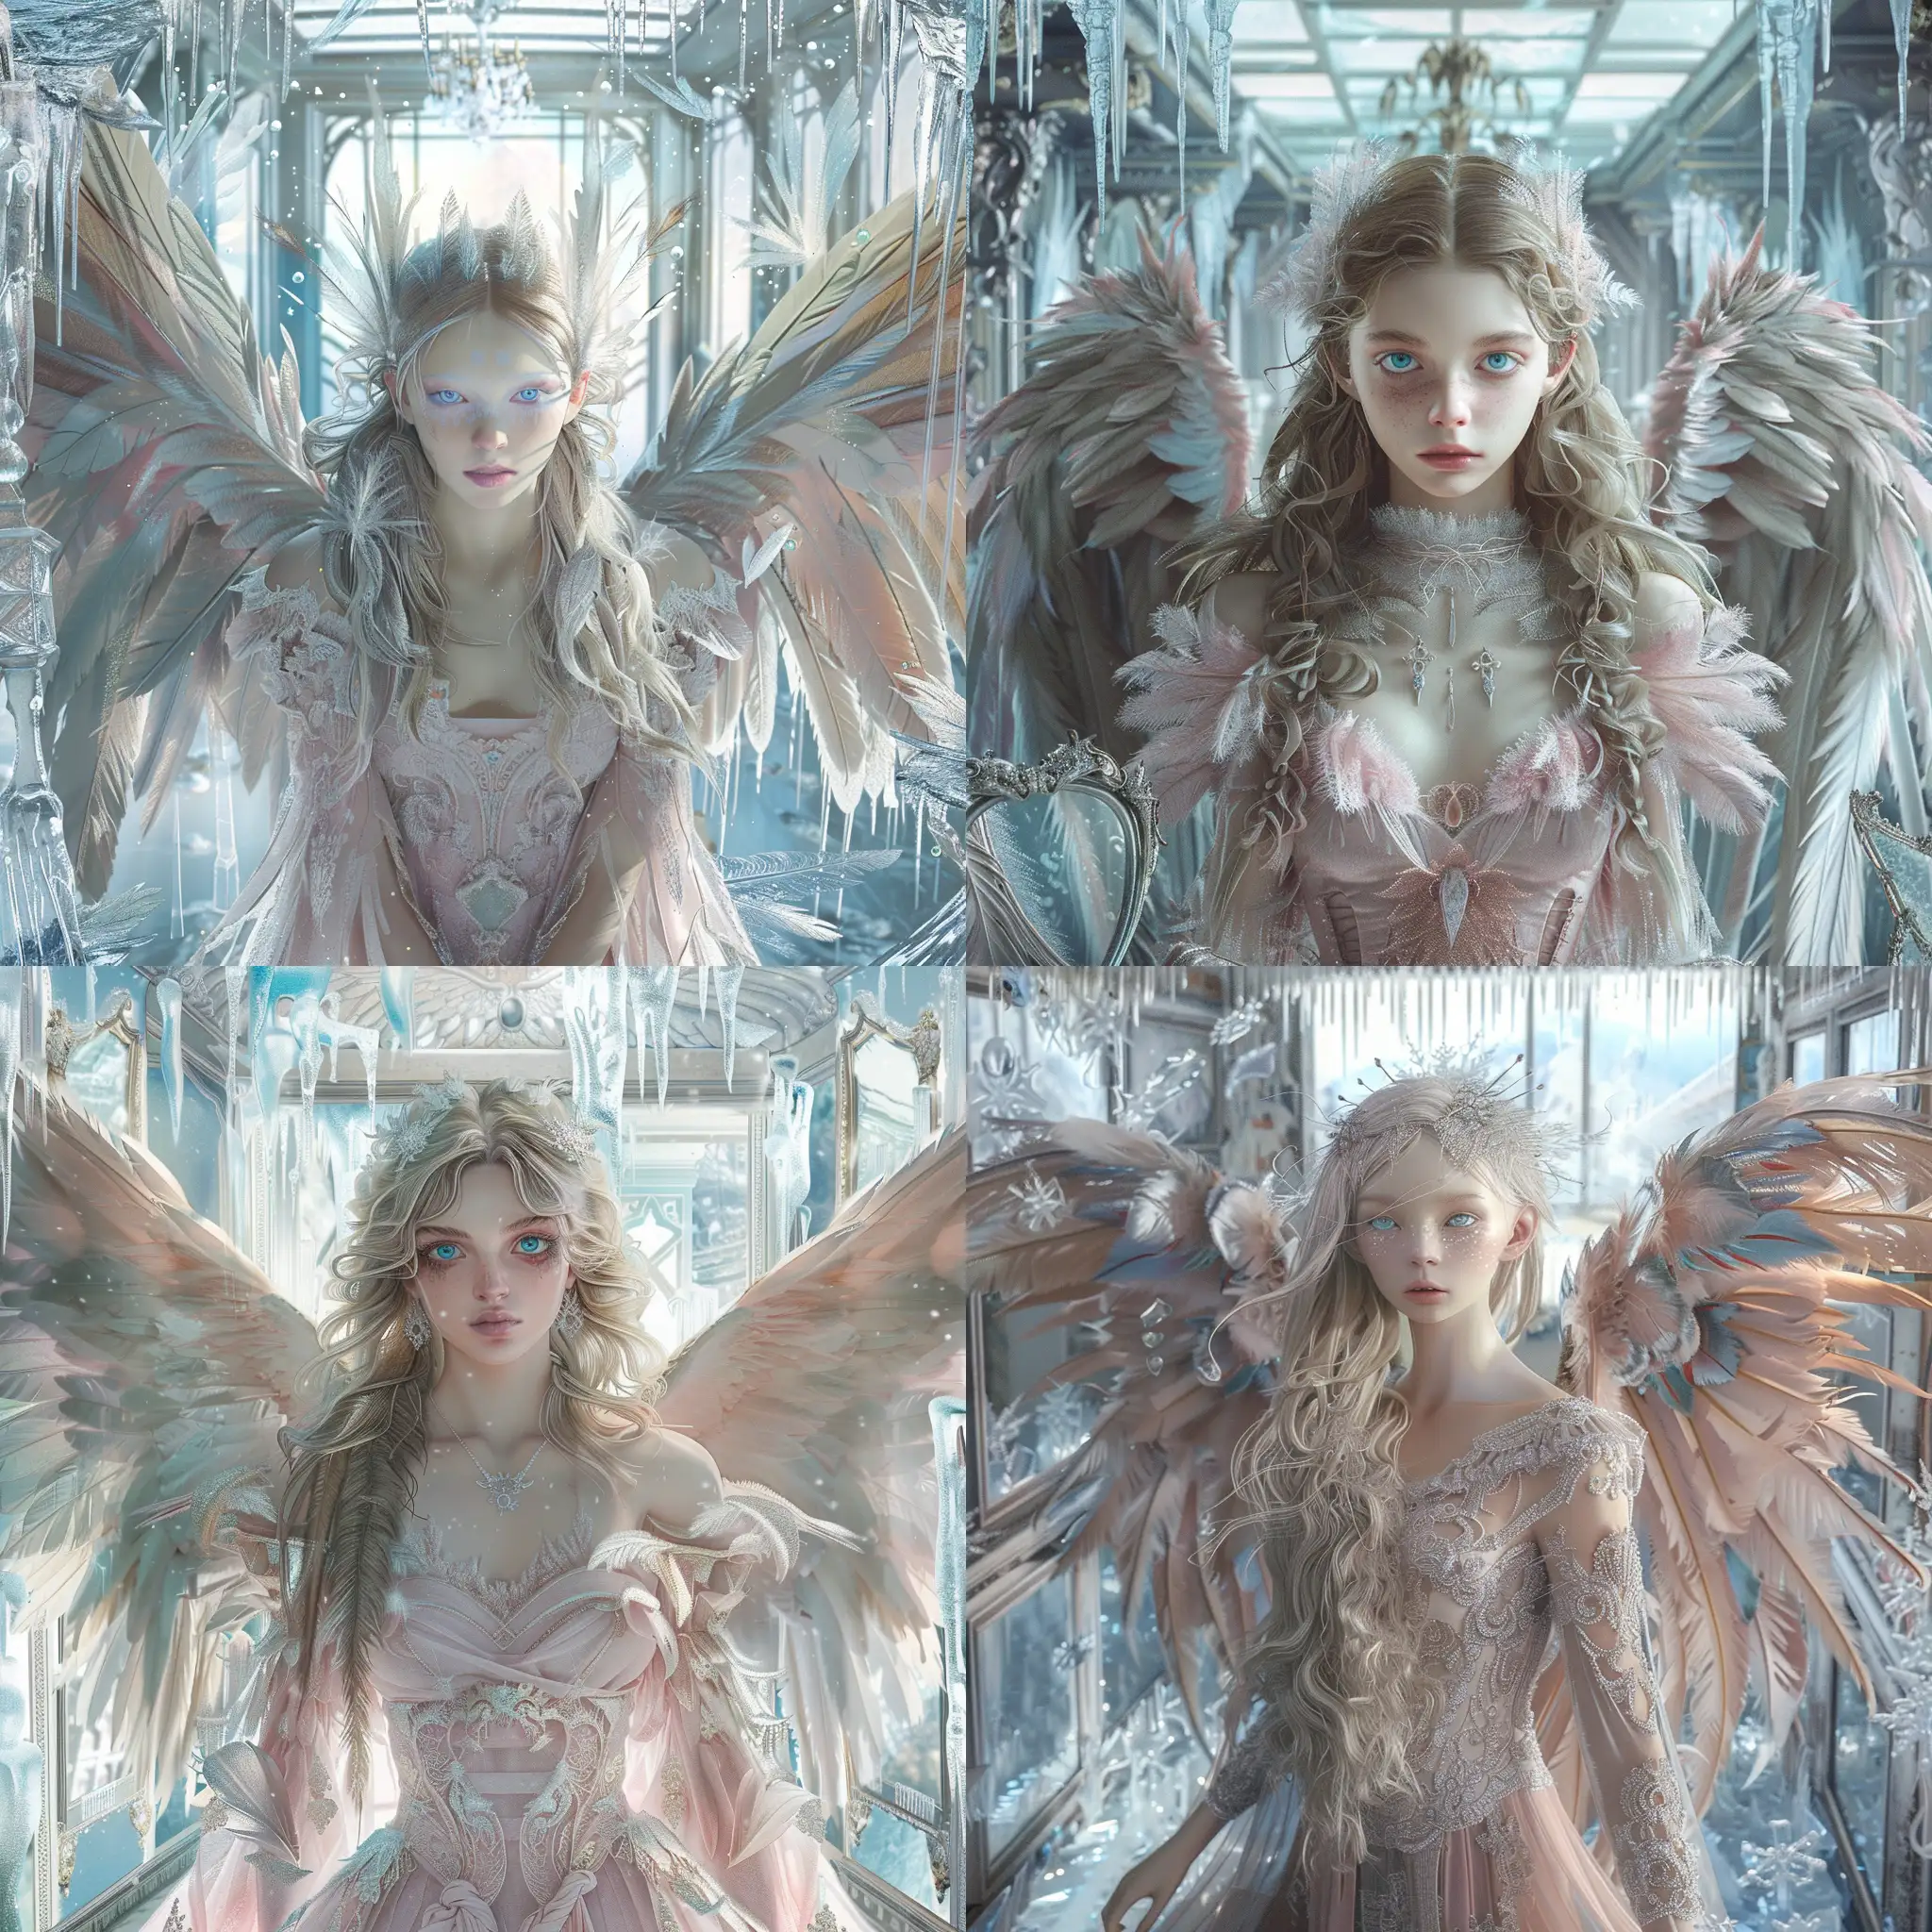 Ethereal-Medieval-Angel-Surrounded-by-Icy-Mirrors-and-Magical-Images